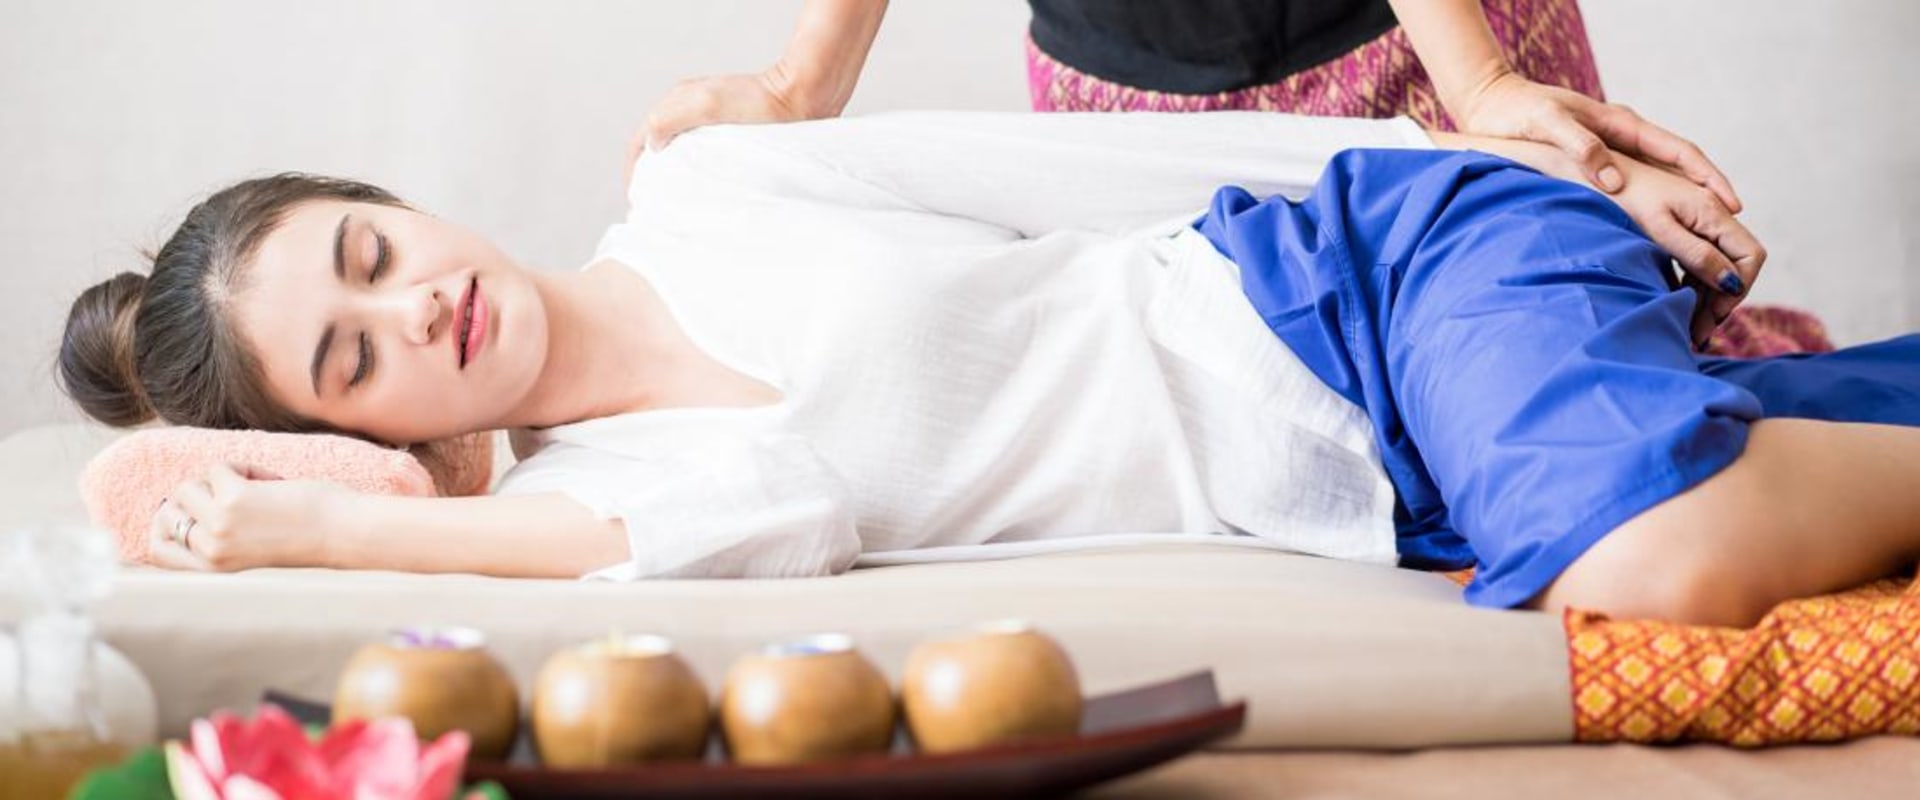 Can a massage have negative effects?